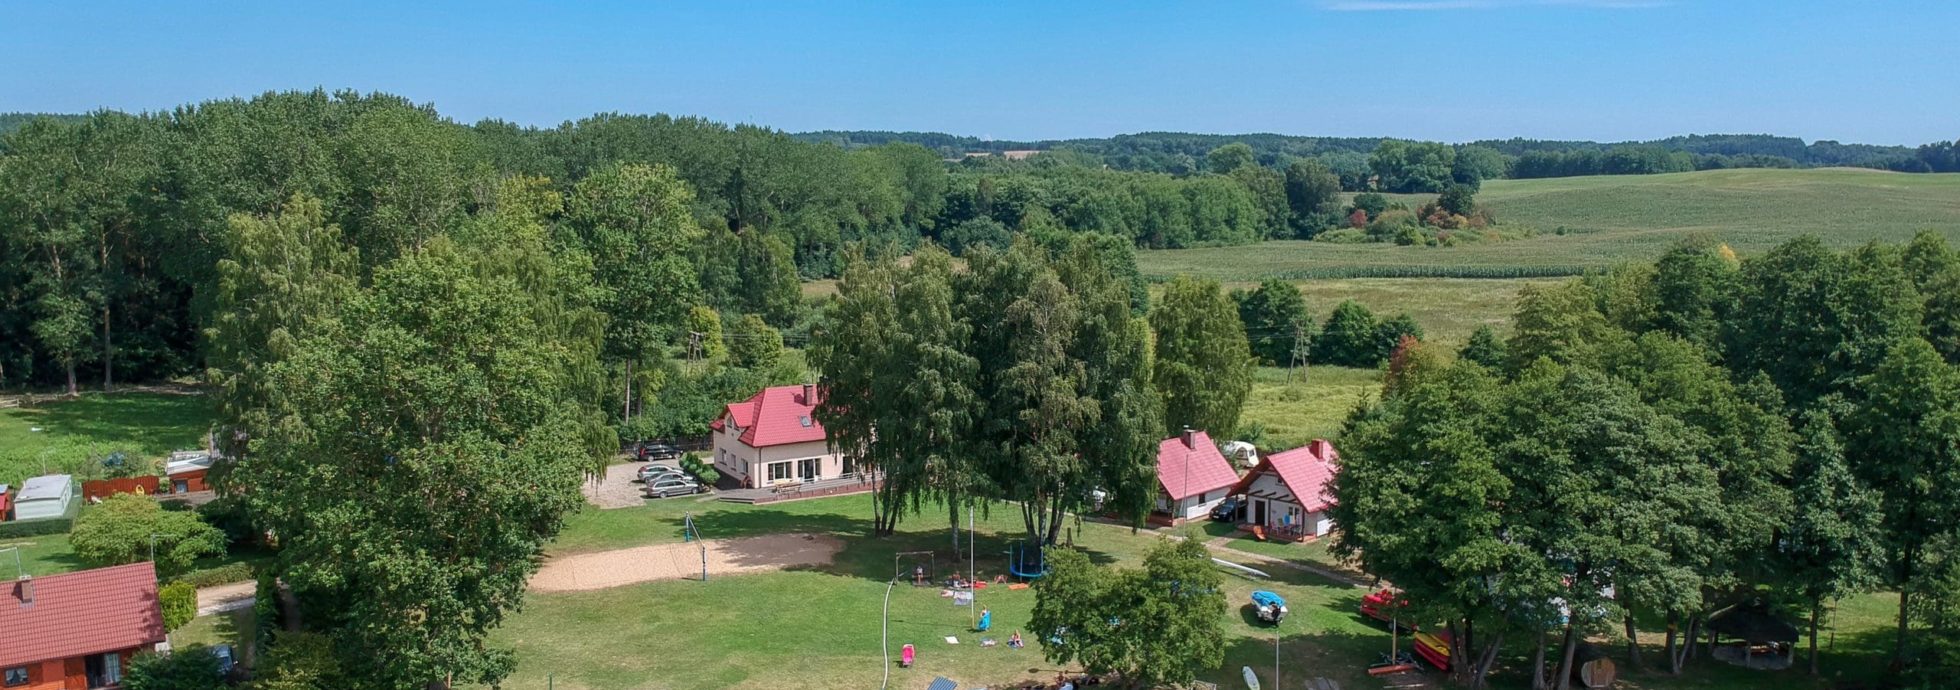 View from the drone on the Ośrodek Taurus Linowno